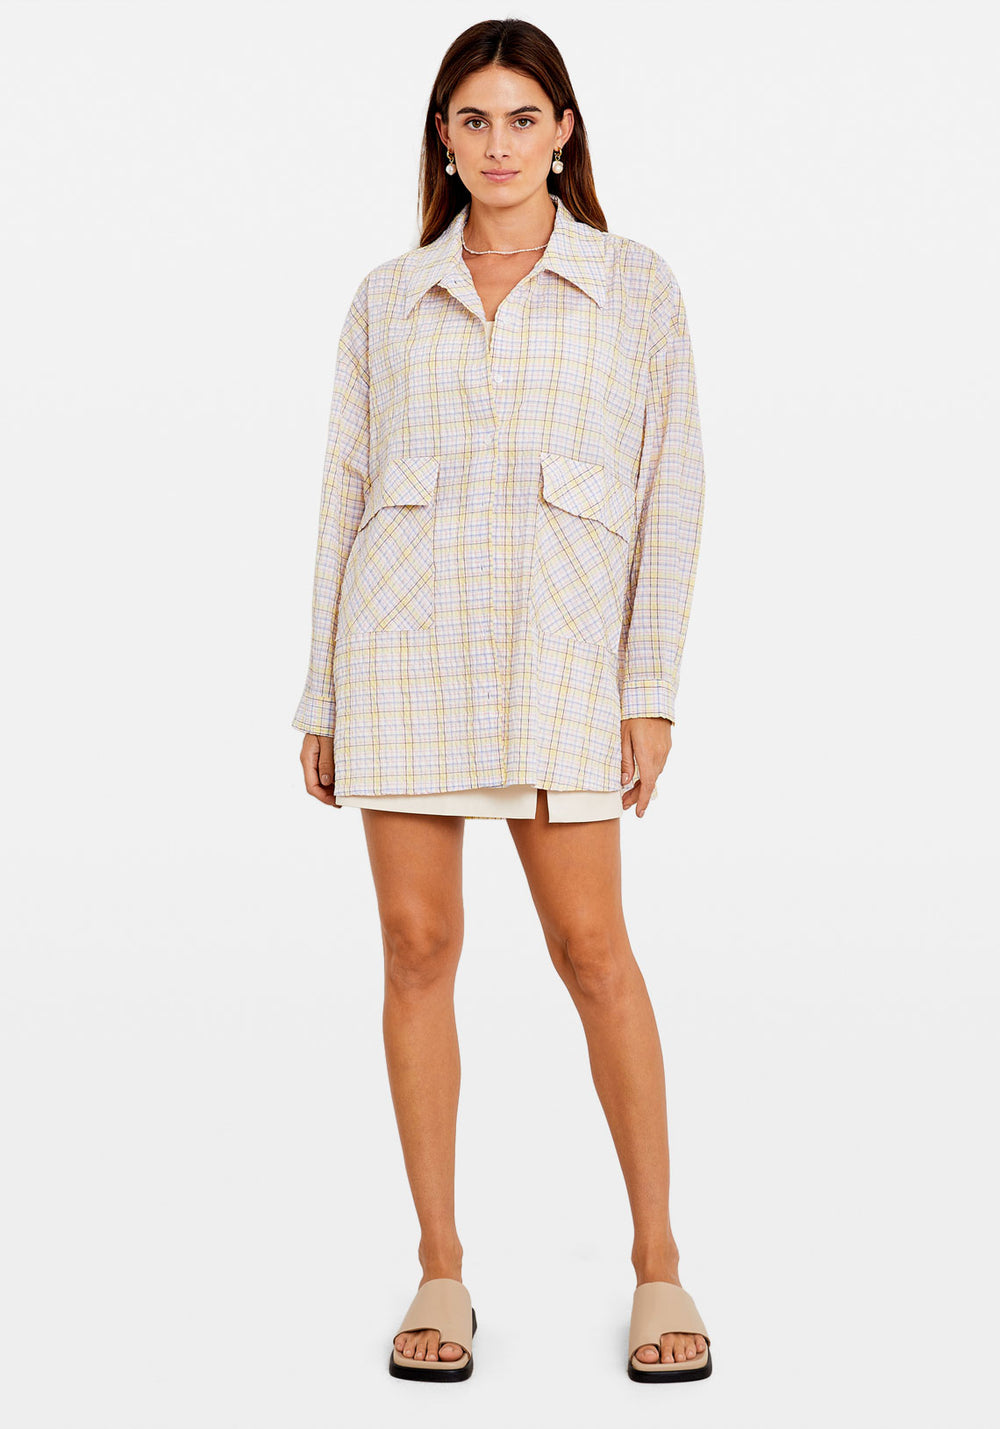 KNOX SQUARED TOP YELLOW GINGHAM